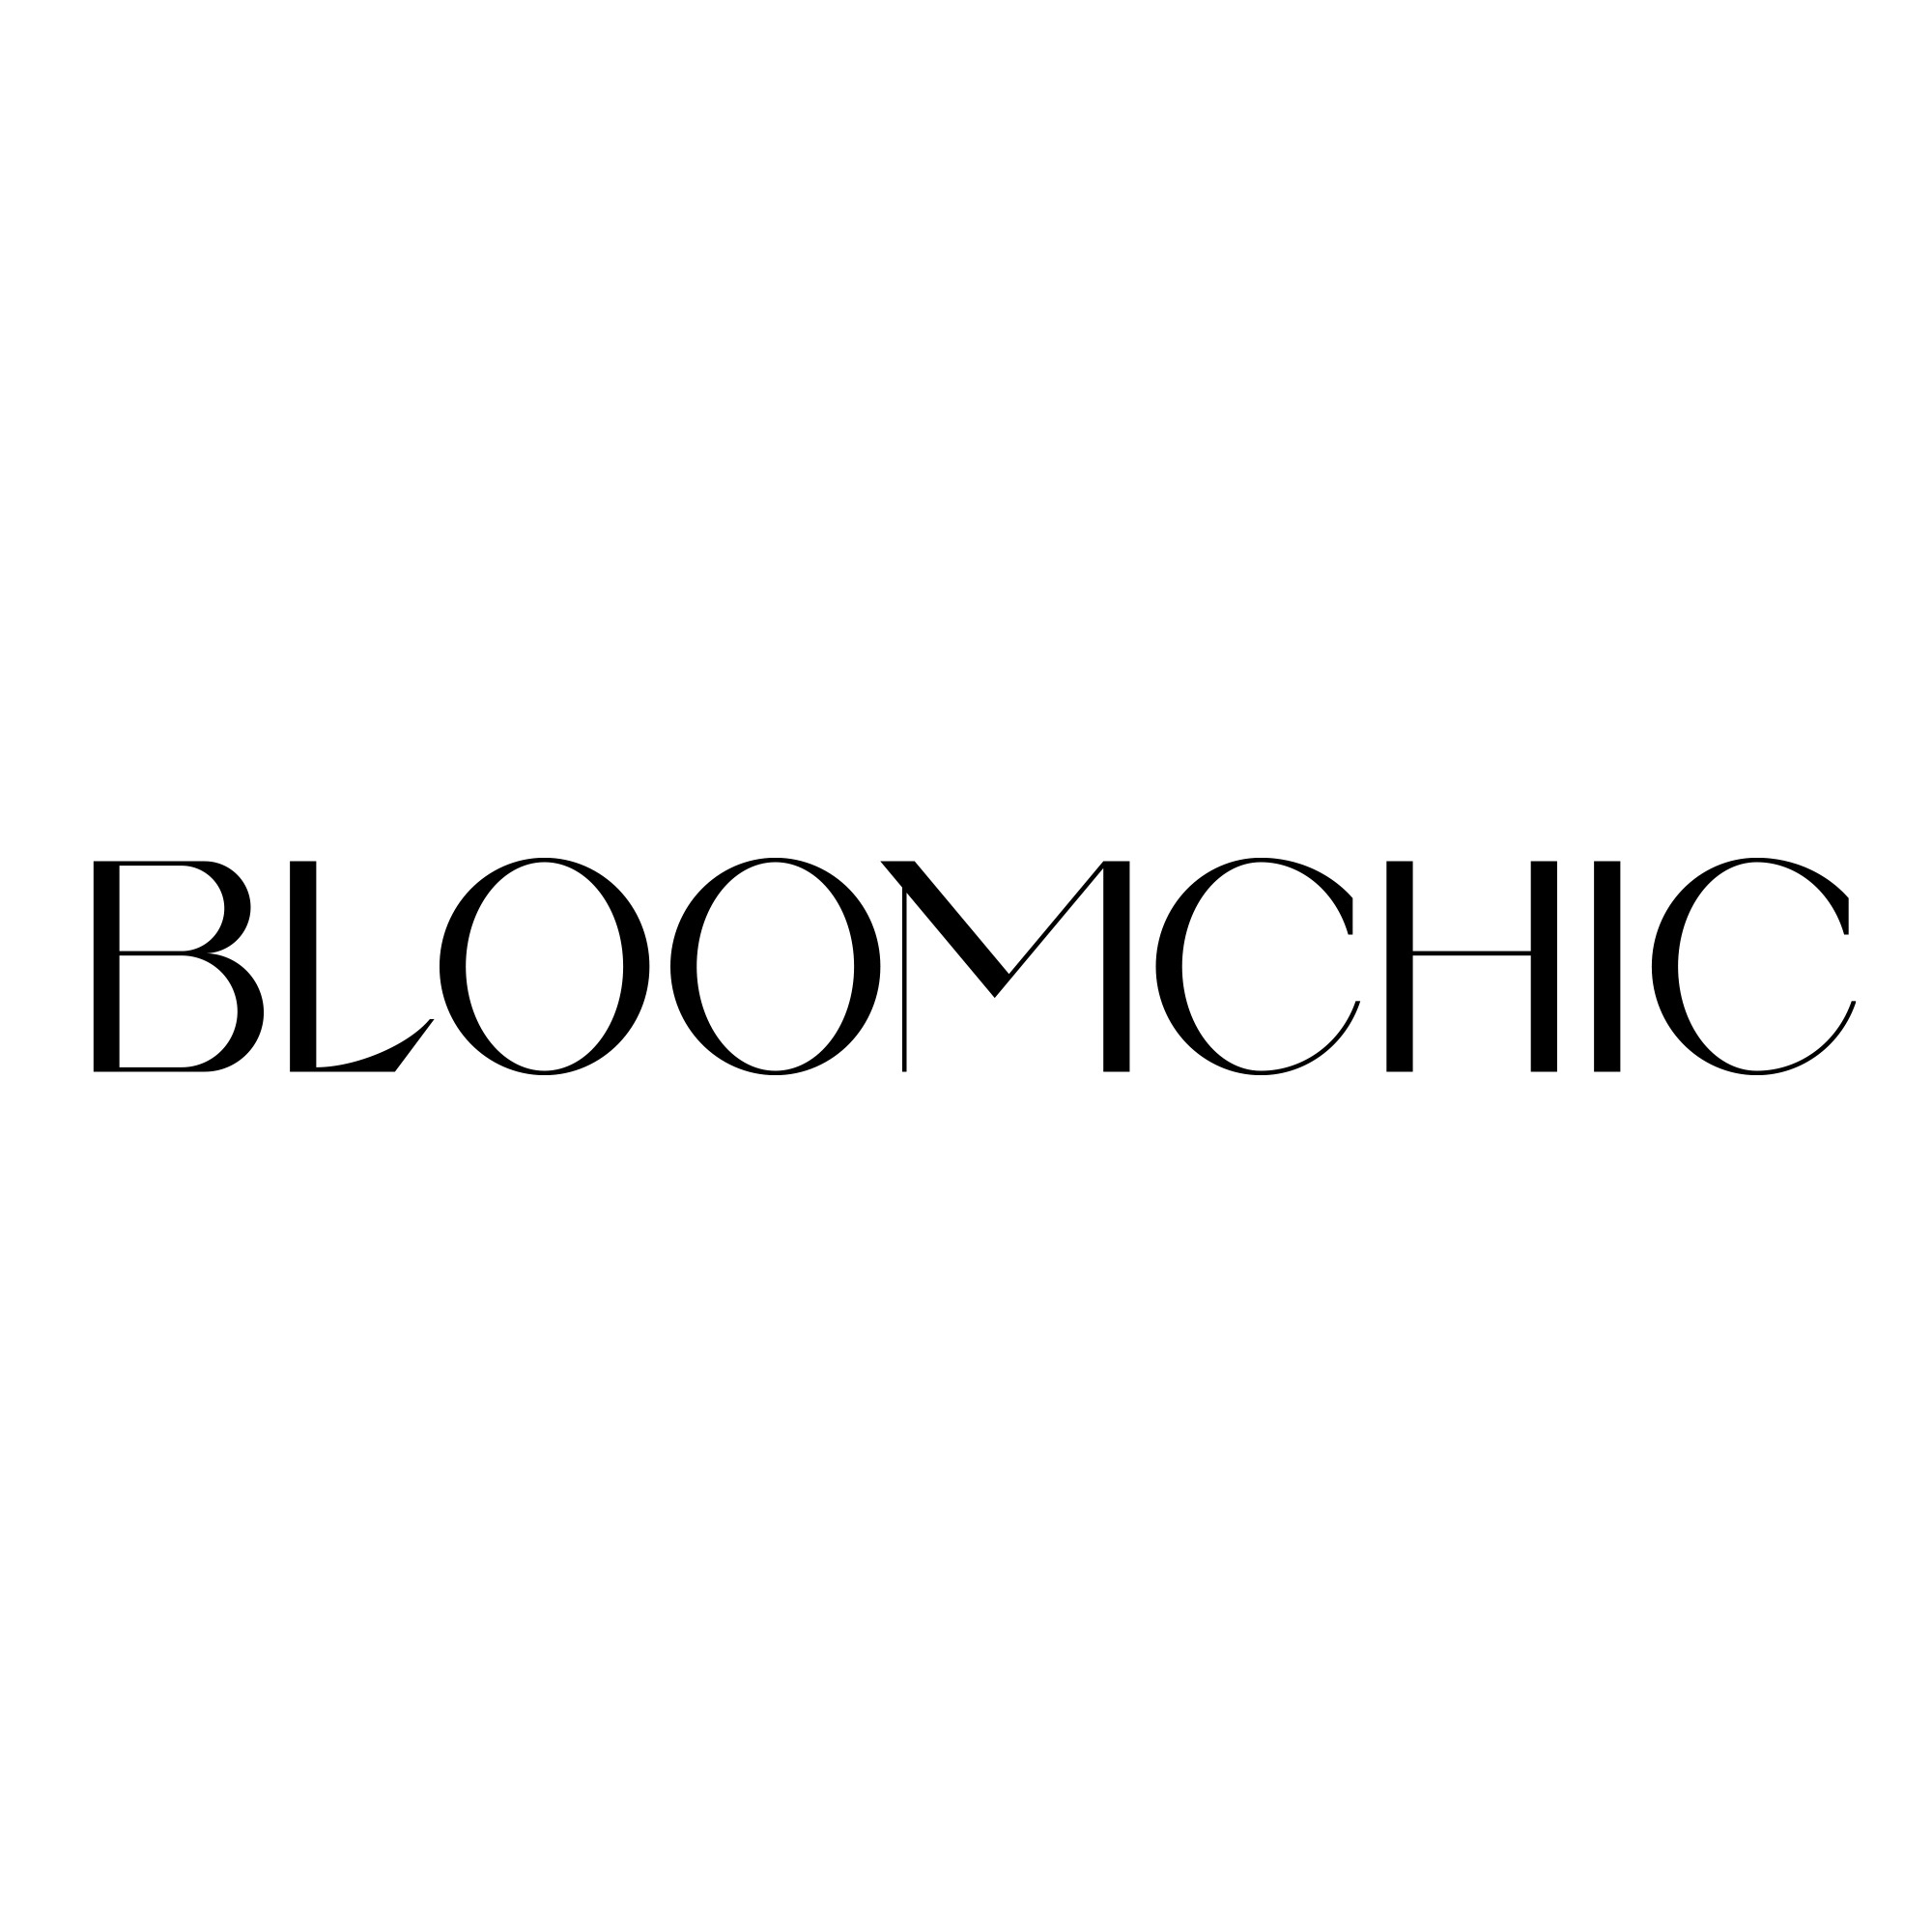 Bloomchic Coupon Codes Up To 50 OFF (1 Working Codes) January 2023